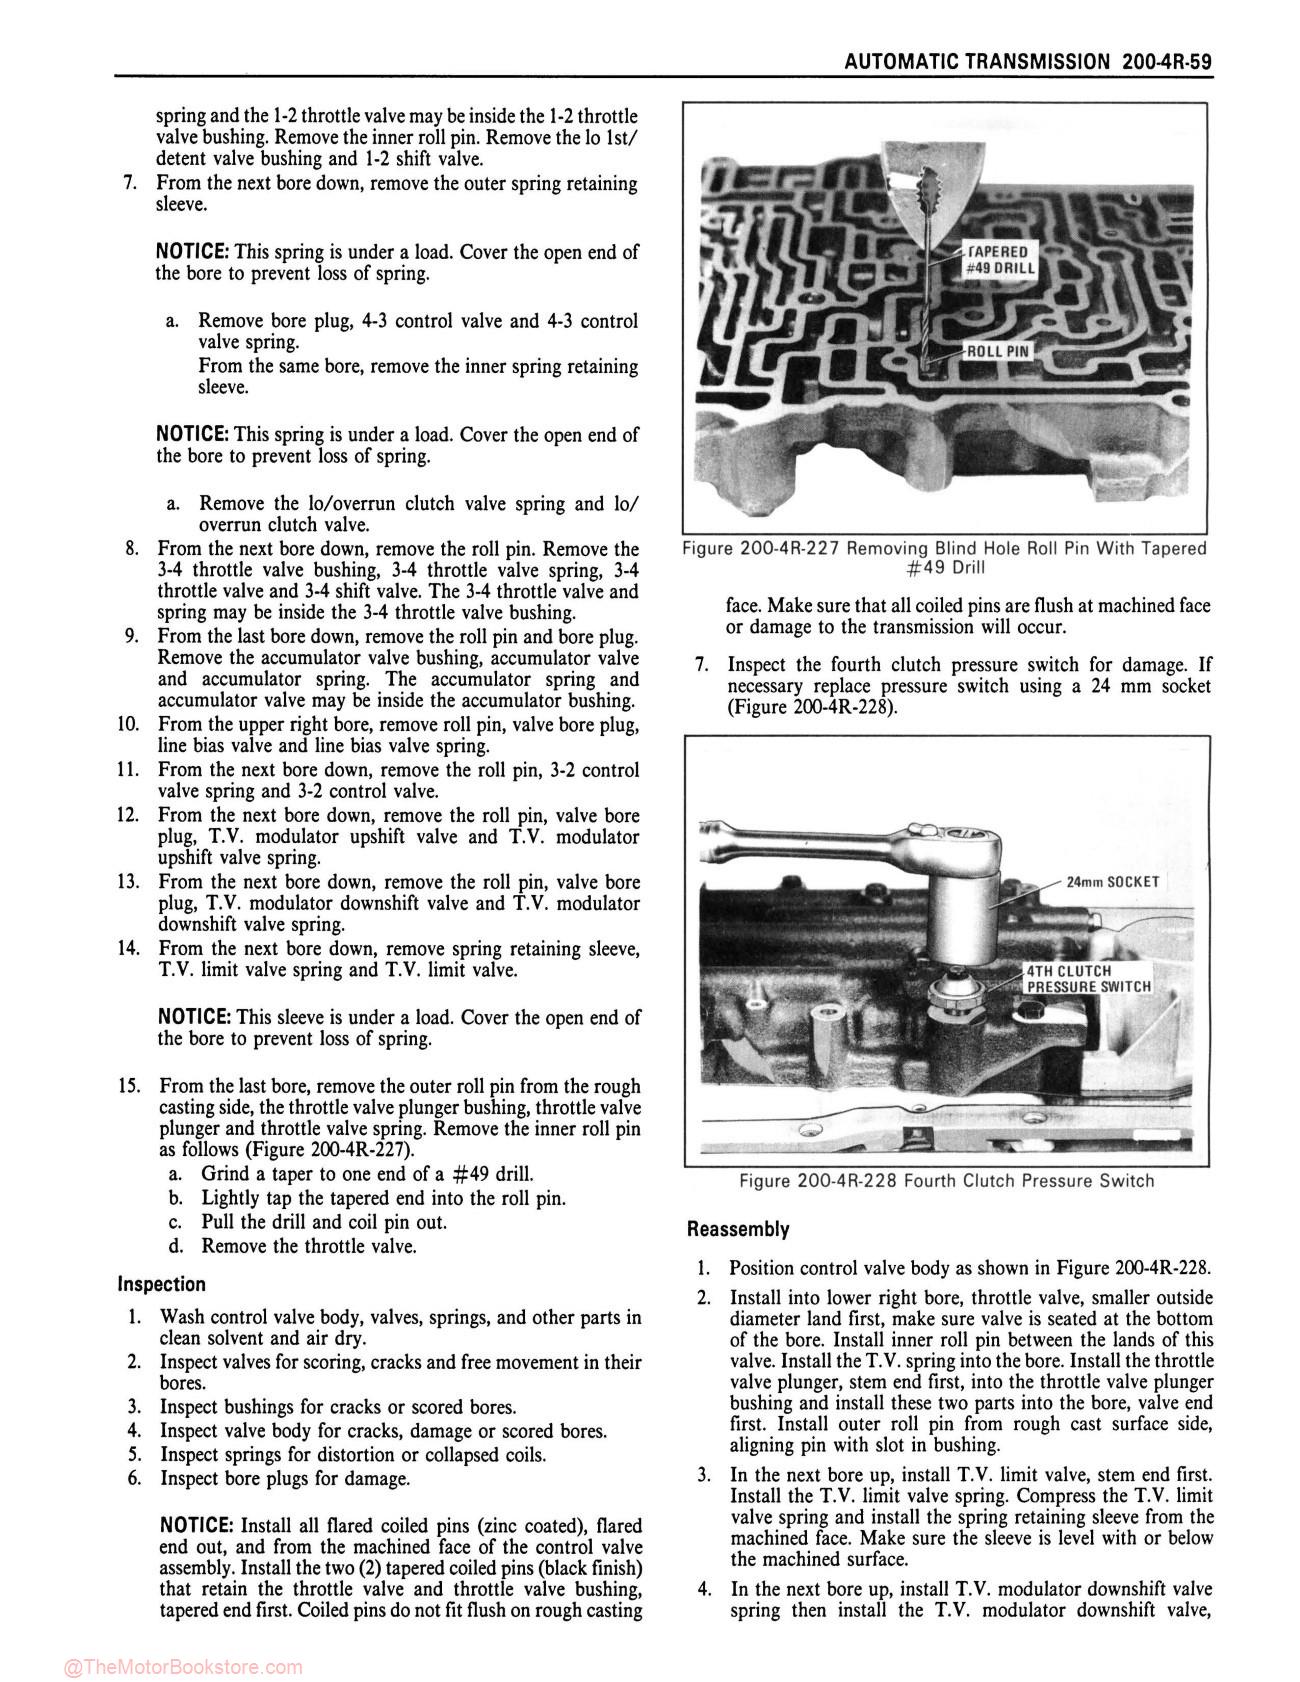 1986 Buick and Grand National Service Manual - Sample Page 2